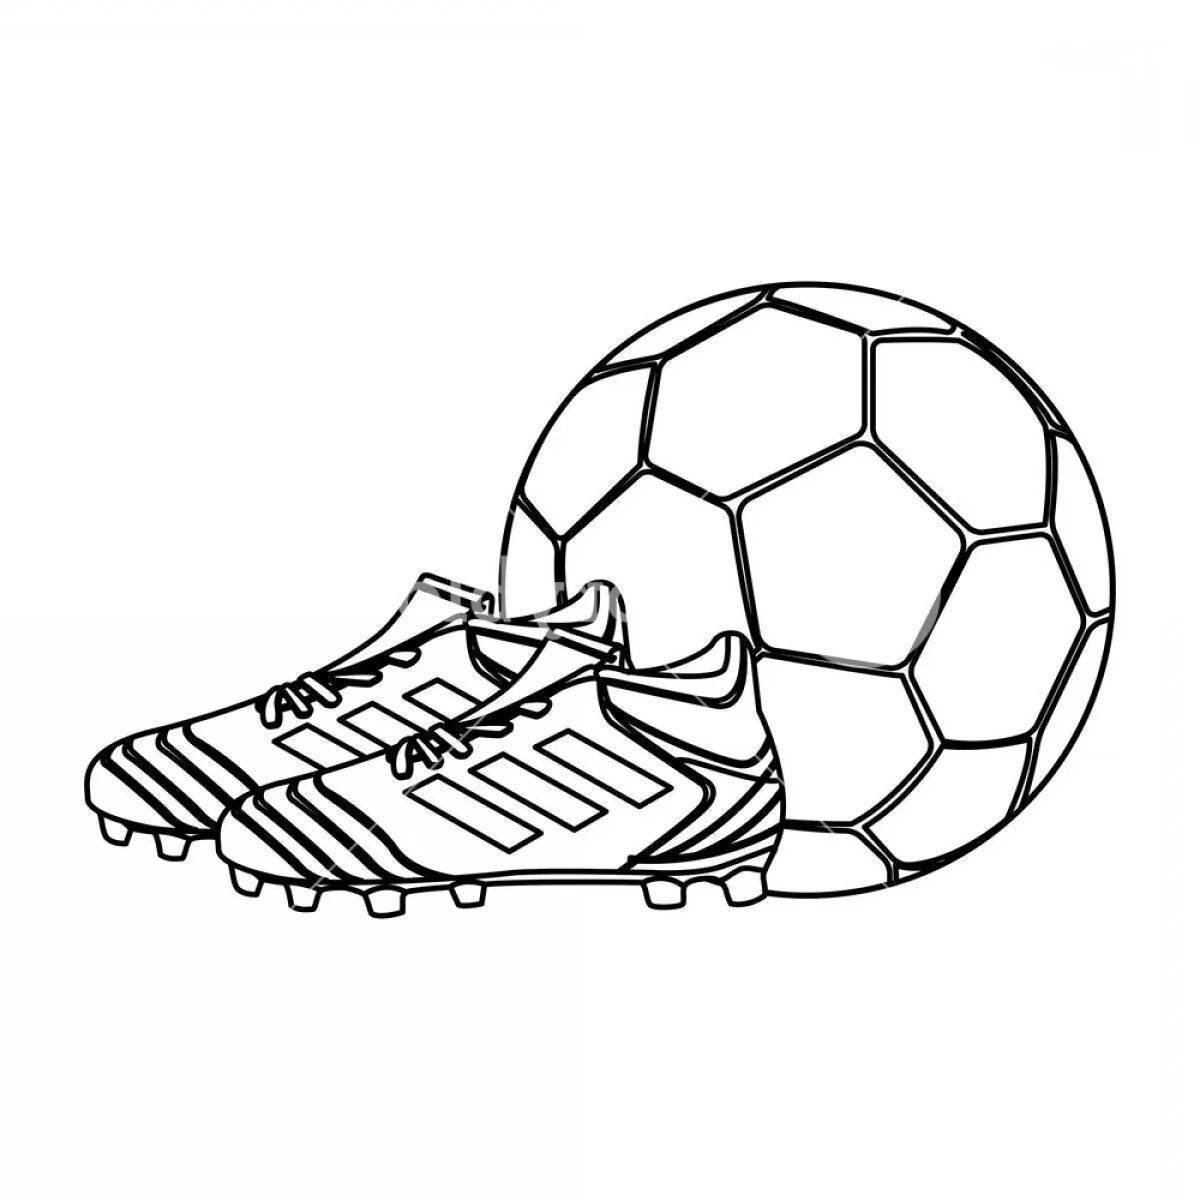 Coloring page with striking football boots